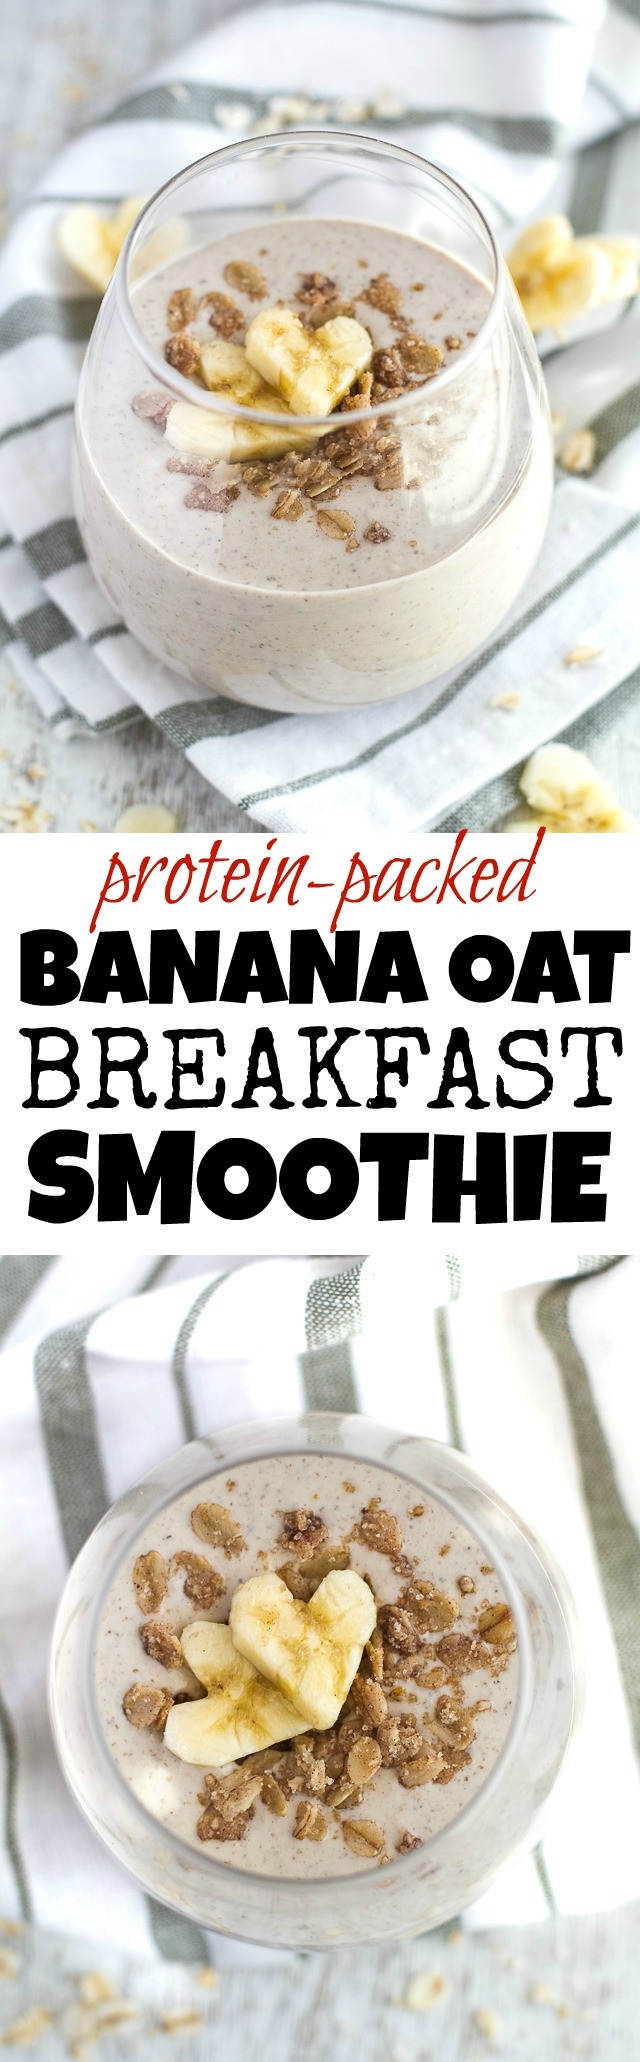 Breakfast Smoothies With Oats
 Banana Oat Breakfast Smoothie